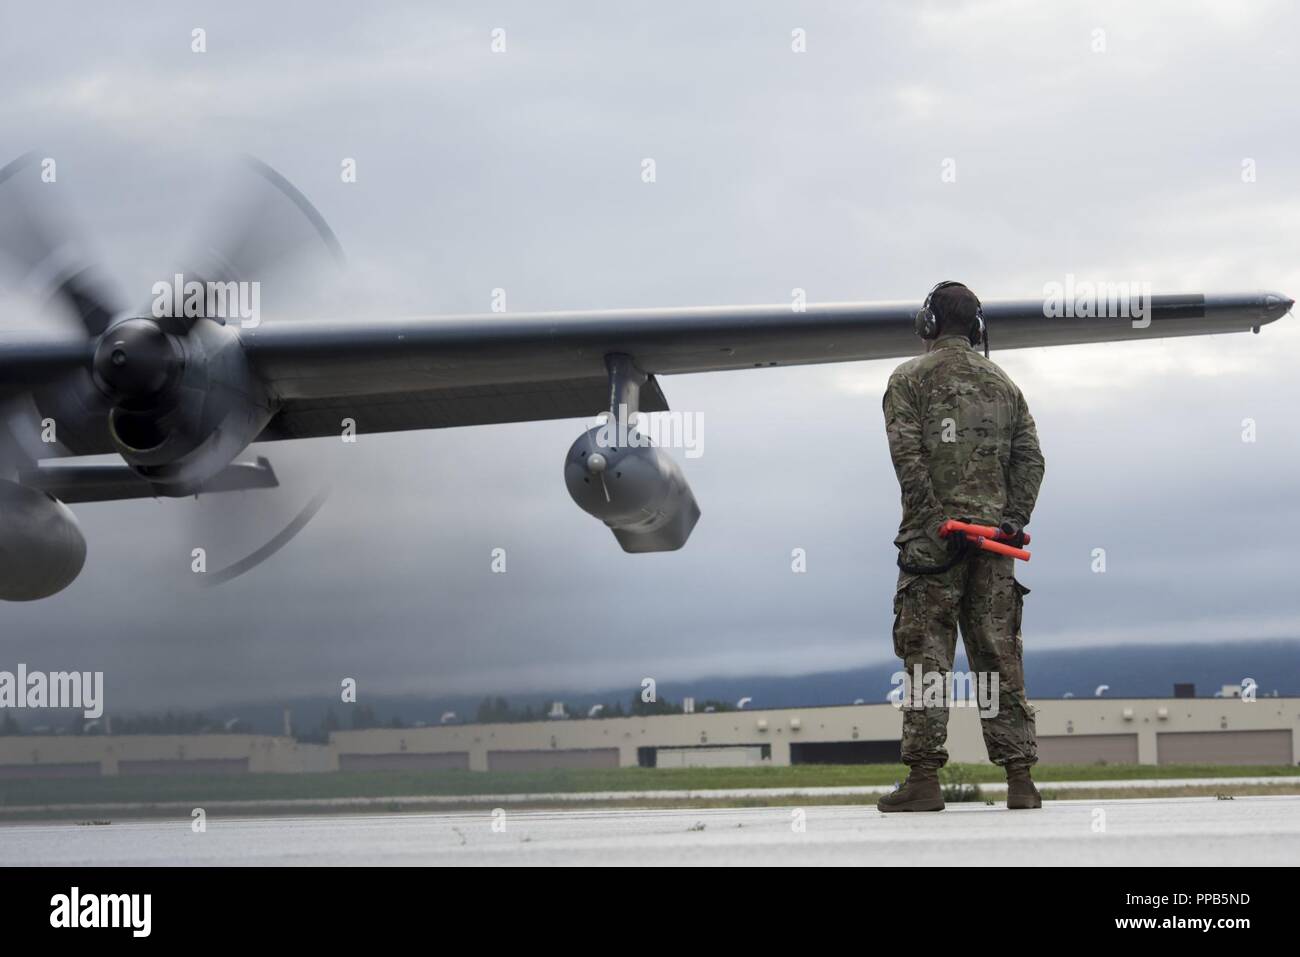 U.S. Air Force Staff Sgt. Joshua Hoffman, a 353rd Special Operations Maintenance Squadron crew chief from Kadena Air Force Base, Japan, prepares to marshal a U.S. Air Force MC-130H Combat Talon ll during Red Flag-Alaska 18-3 at Joint Base Elmendorf-Richardson, Alaska, Aug 16, 2018. RF-A is a Pacific Air Forces-directed field training exercise for U.S. and international forces flown under simulated air combat conditions. The exercises are focused on improving the combat readiness of U.S. and international forces and providing training for units preparing for air expeditionary force taskings. Stock Photo